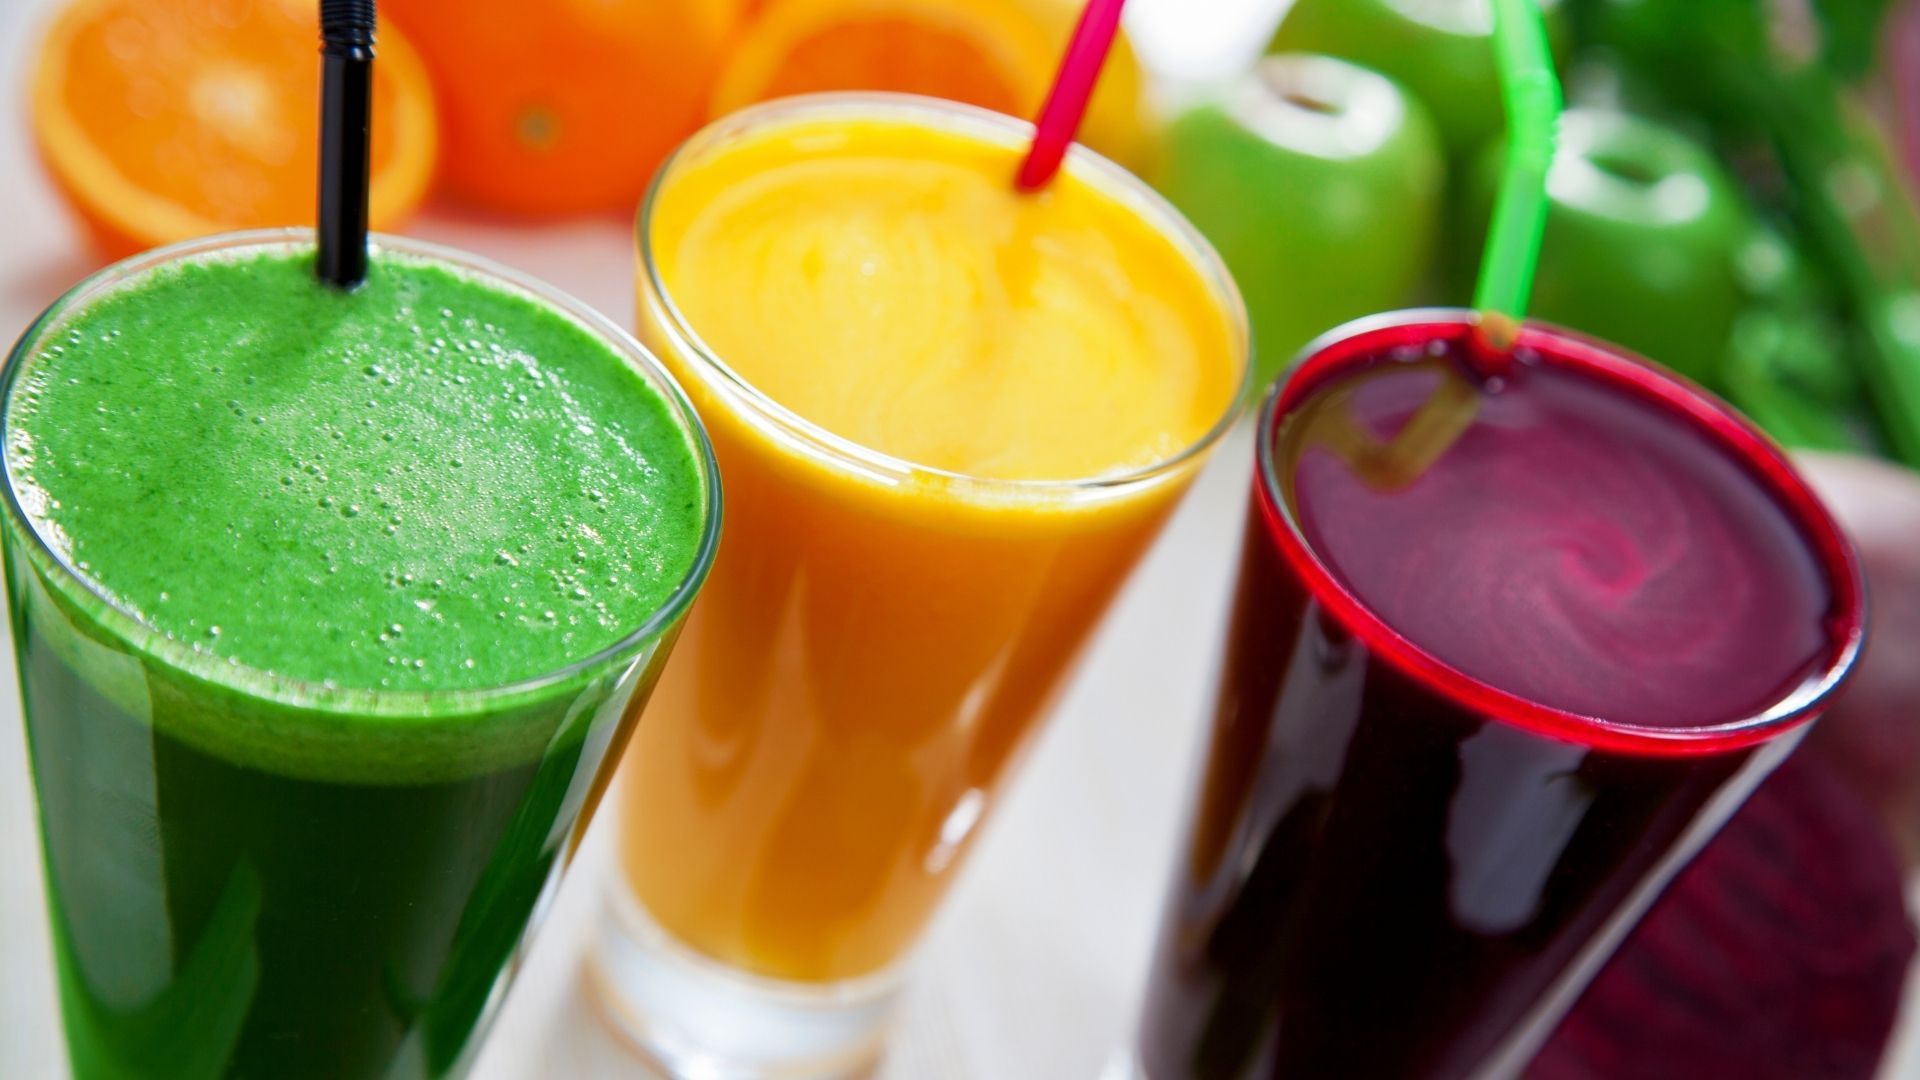 green yellow and red juice detox cleanse drinks on a table